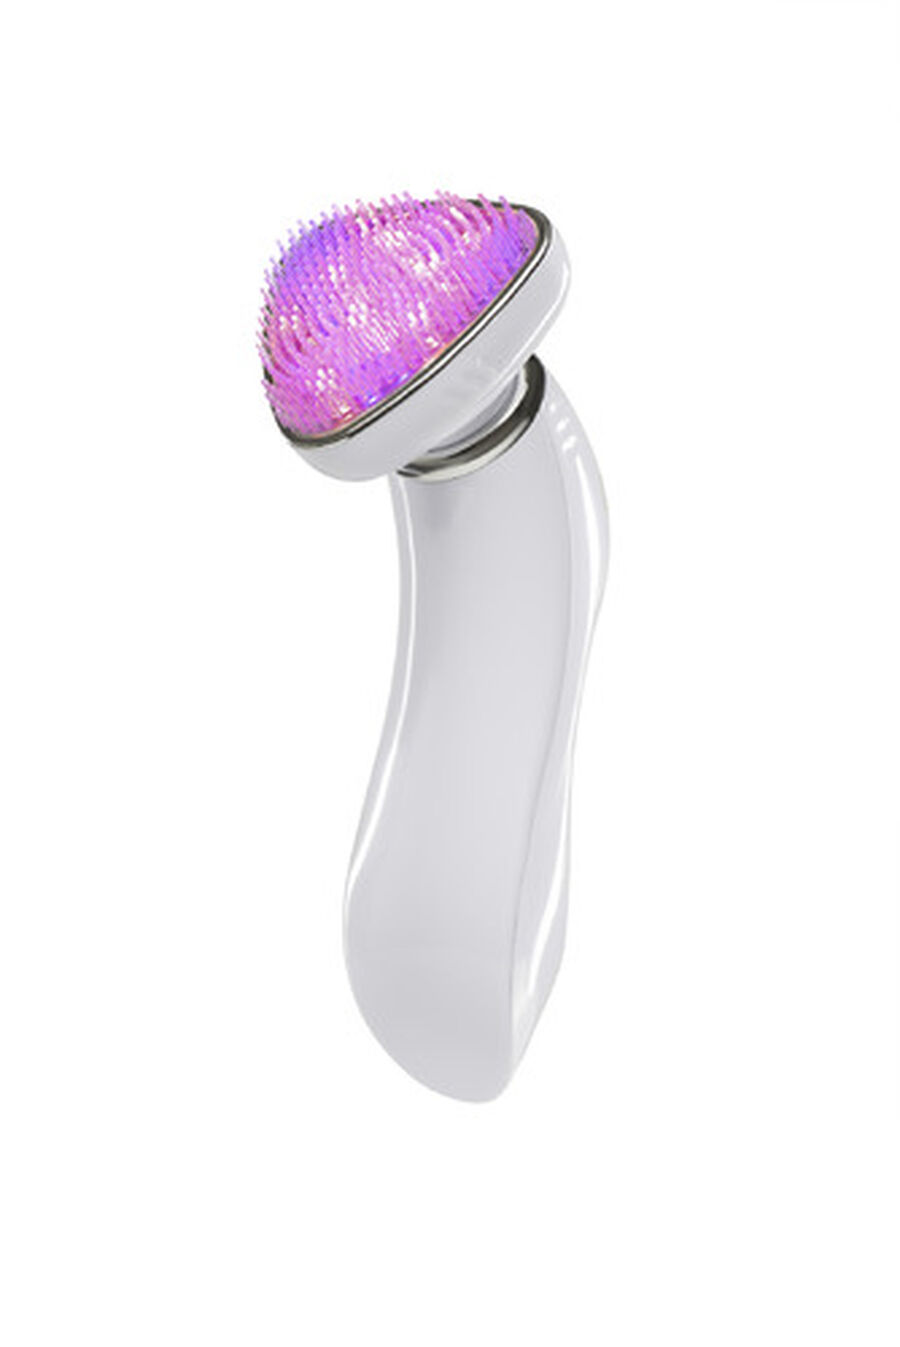 reVive Light Therapy Soniqué Acne LED Sonic Cleansing System, , large image number 2